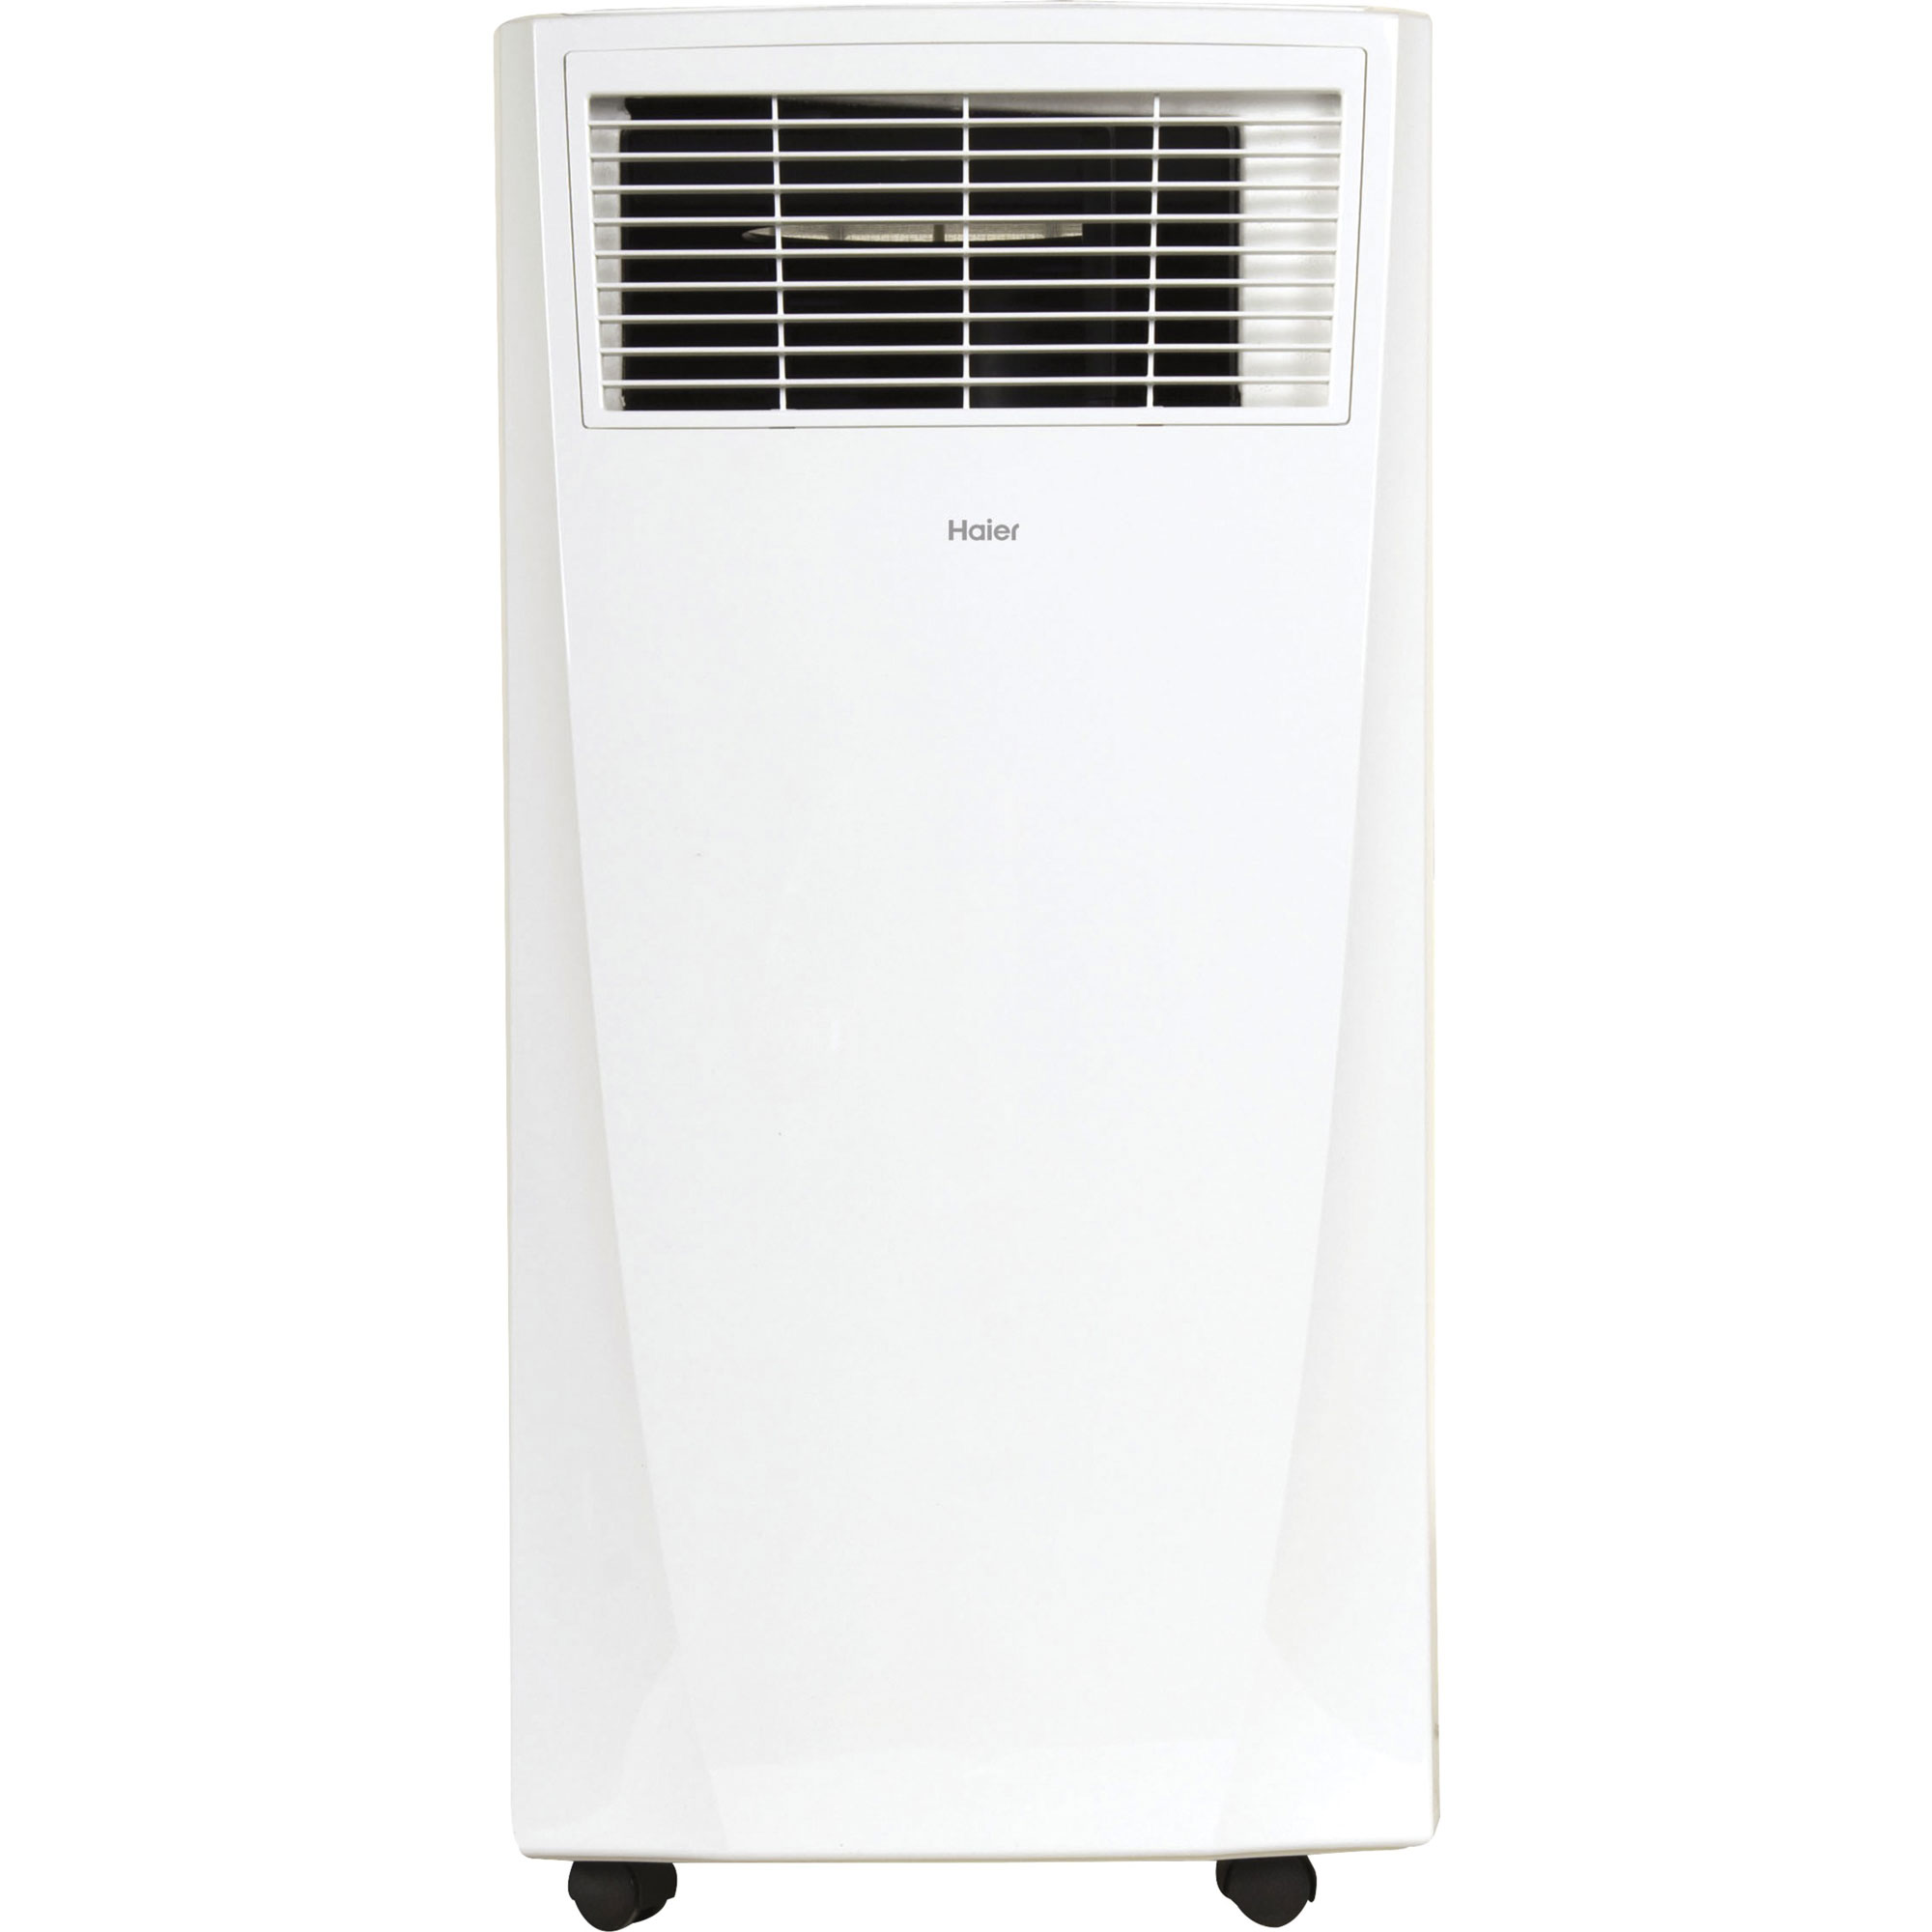 Haier 250 Sq Ft Portable Air Conditioner Unit (Certified Refurbished